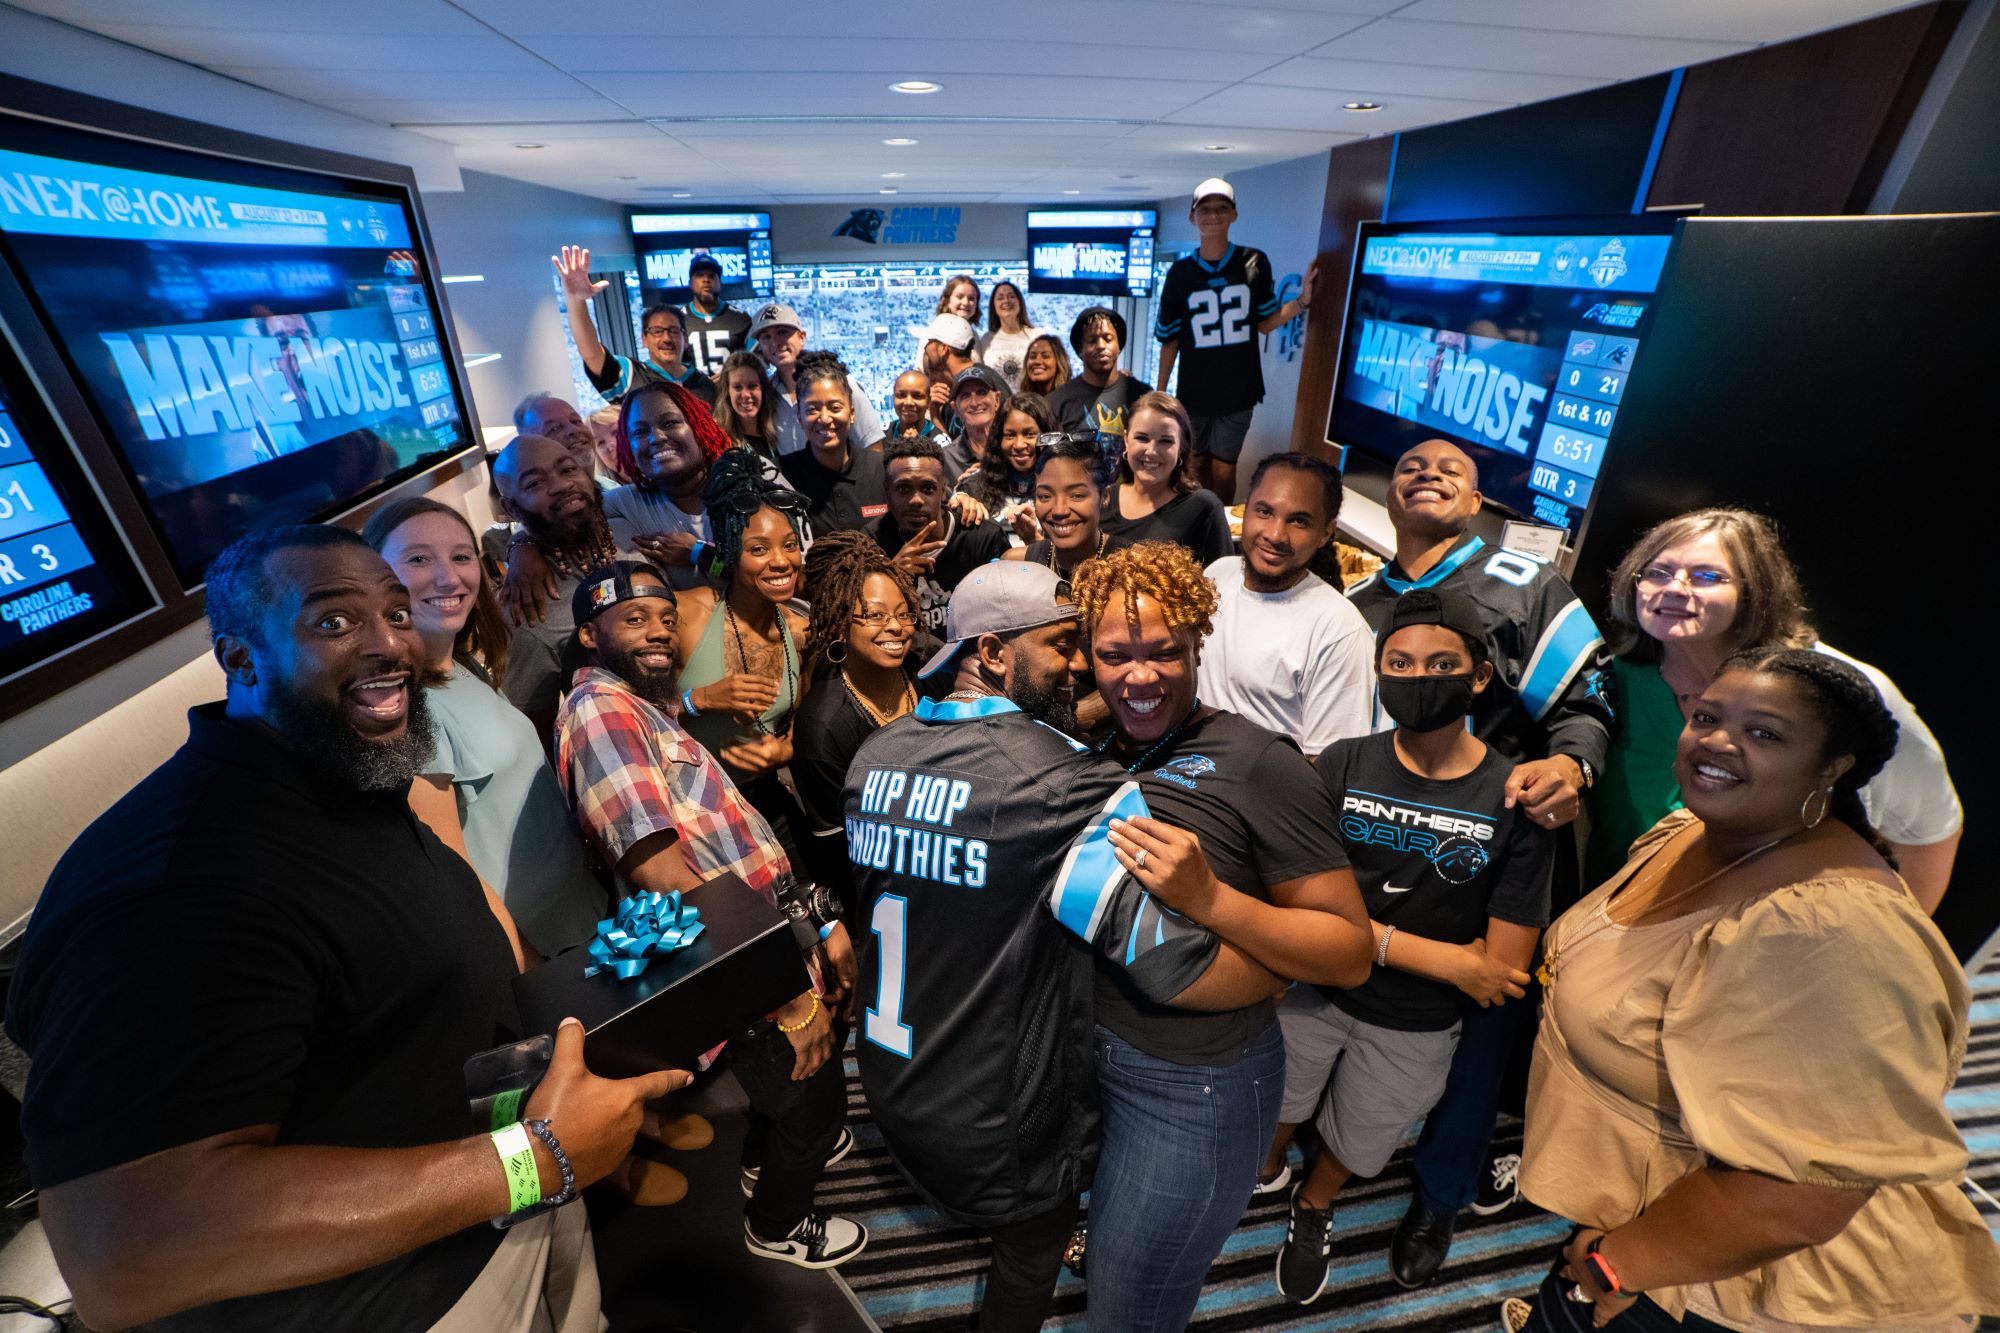 Lenovo and Empowering the Carolinas winners enjoy the Panthers game Friday in Charlotte, NC